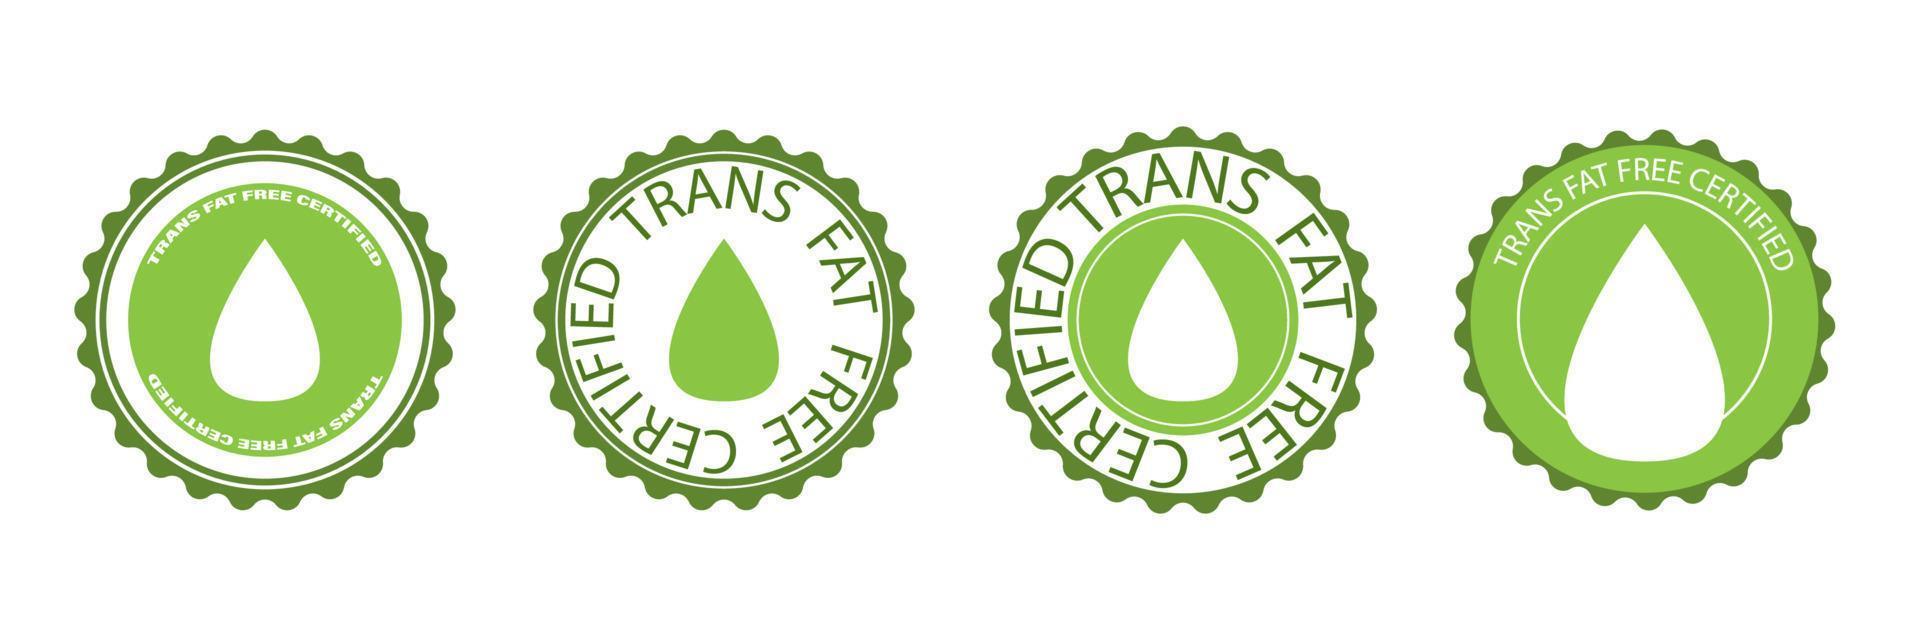 Trans fat free certified. Set of round icon vector